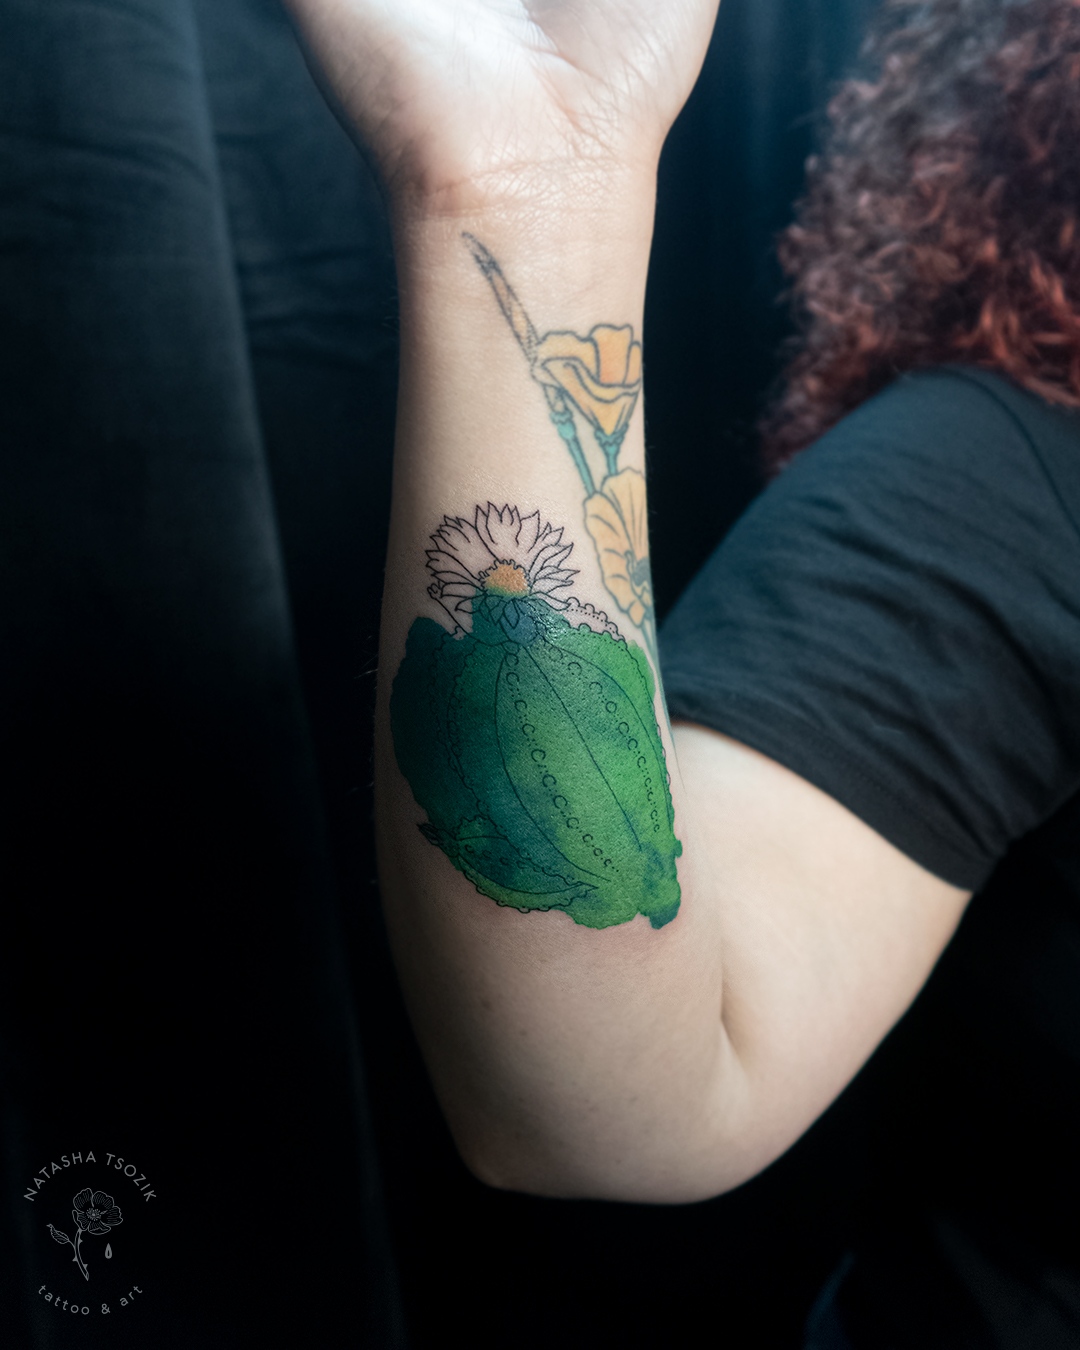 A watercolor cactus tattoo on a forearm.